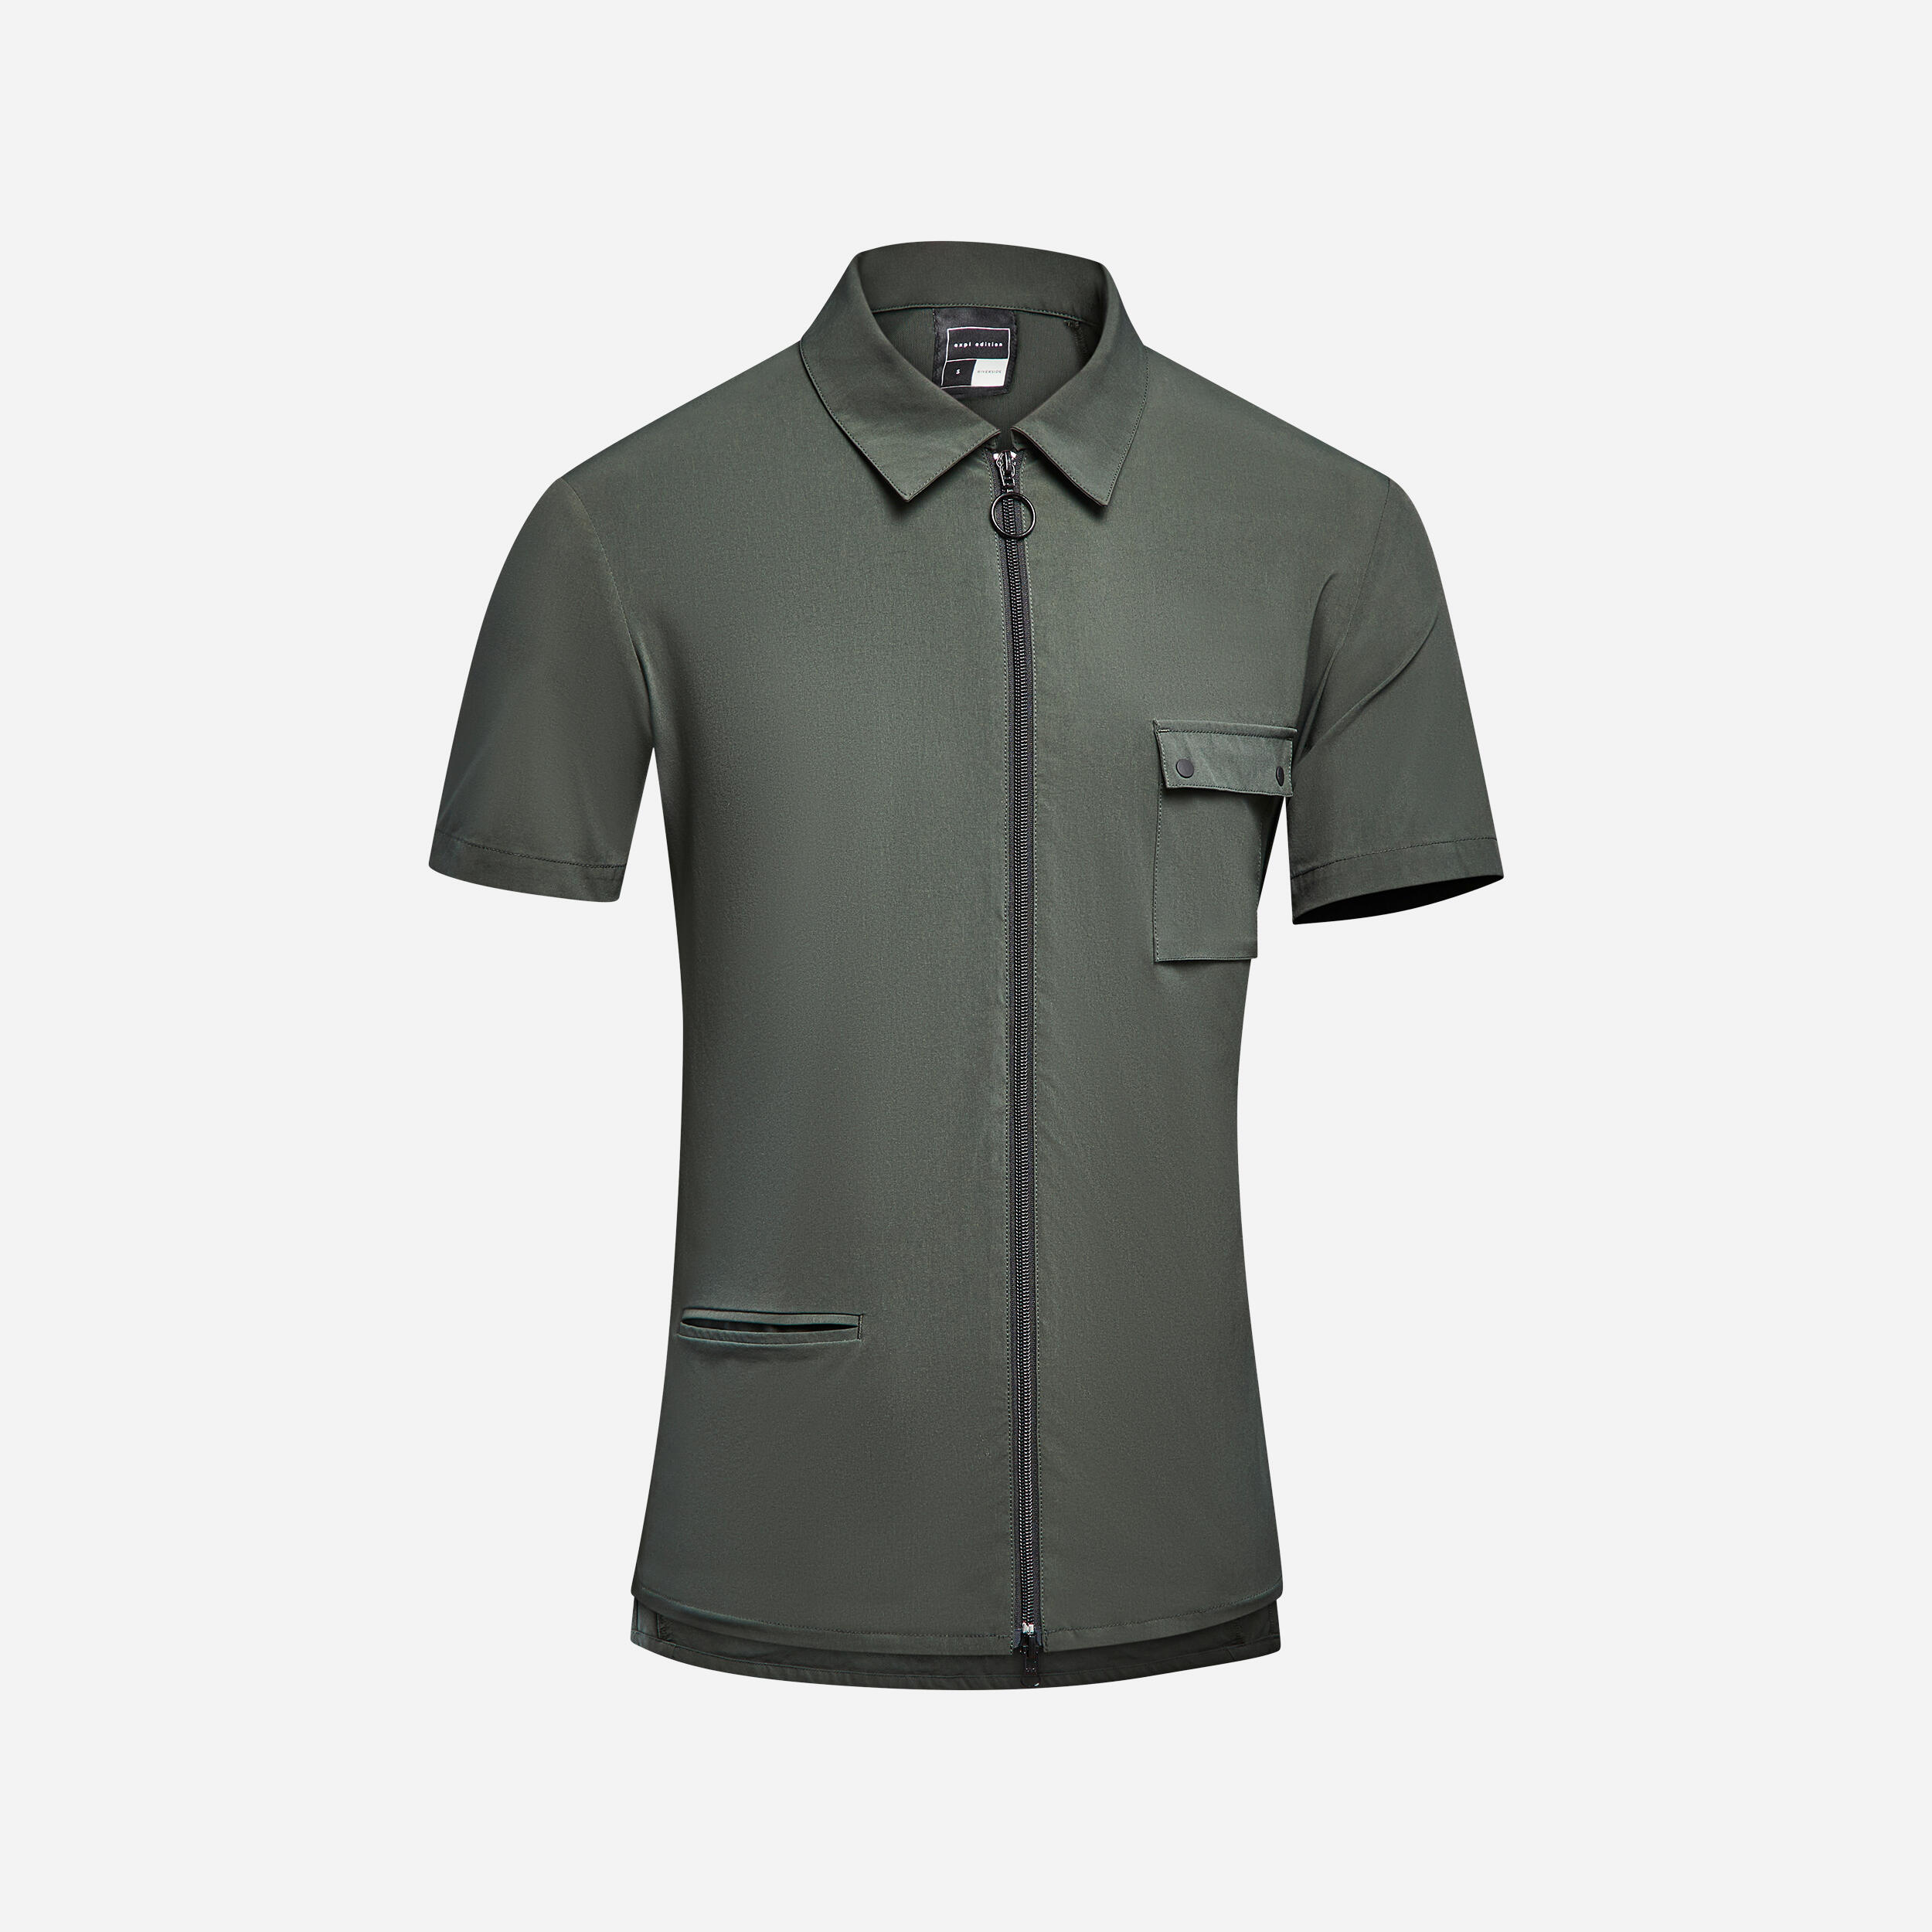 Gravel unisex cycling short-sleeved shirt, for travel and bikepacking 1/9